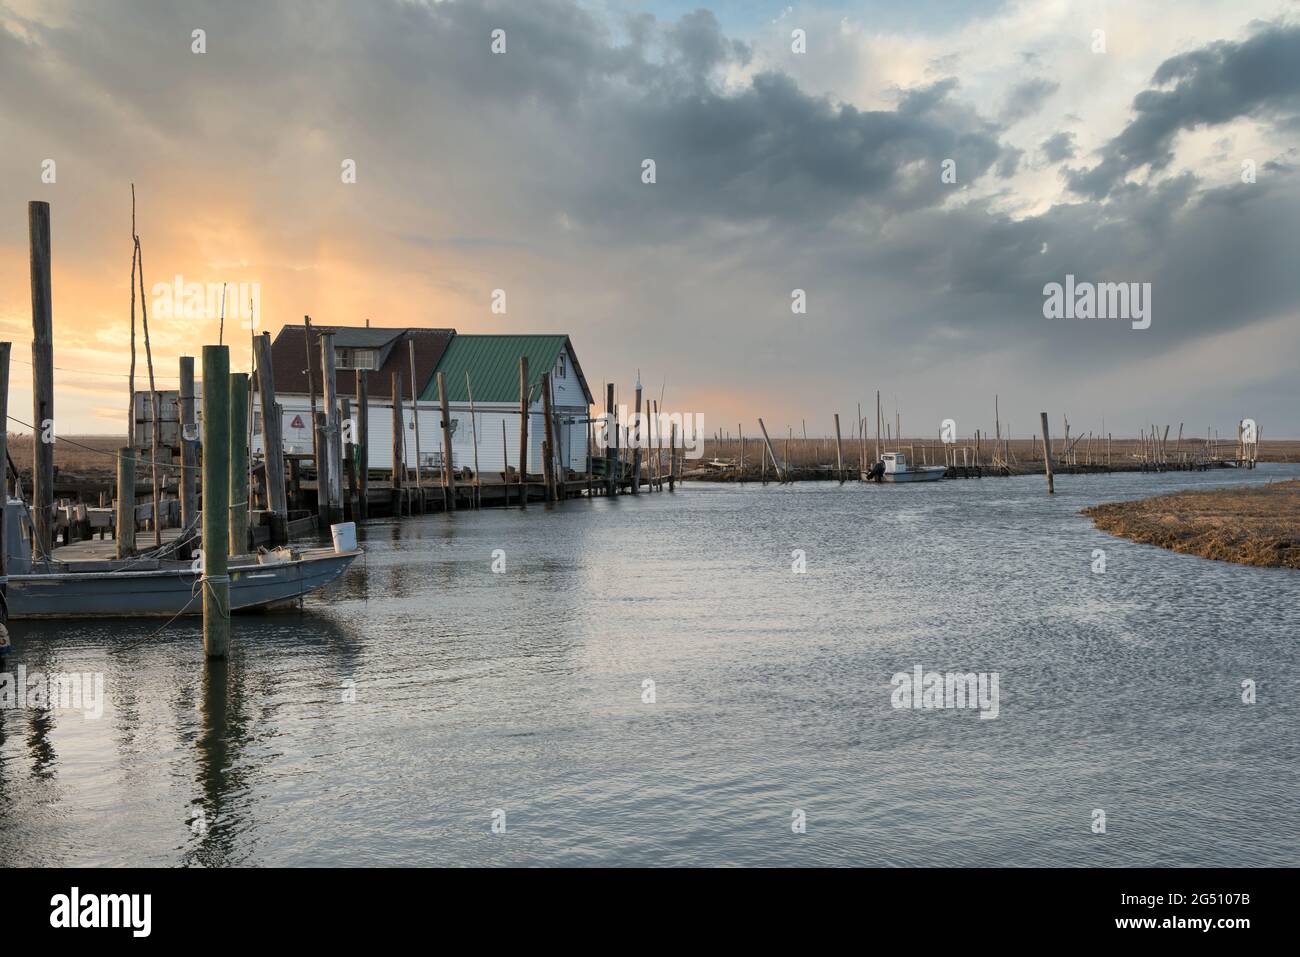 Fishing area with bait house and eatery, with a dramatic sky, dock, water and land. Stock Photo